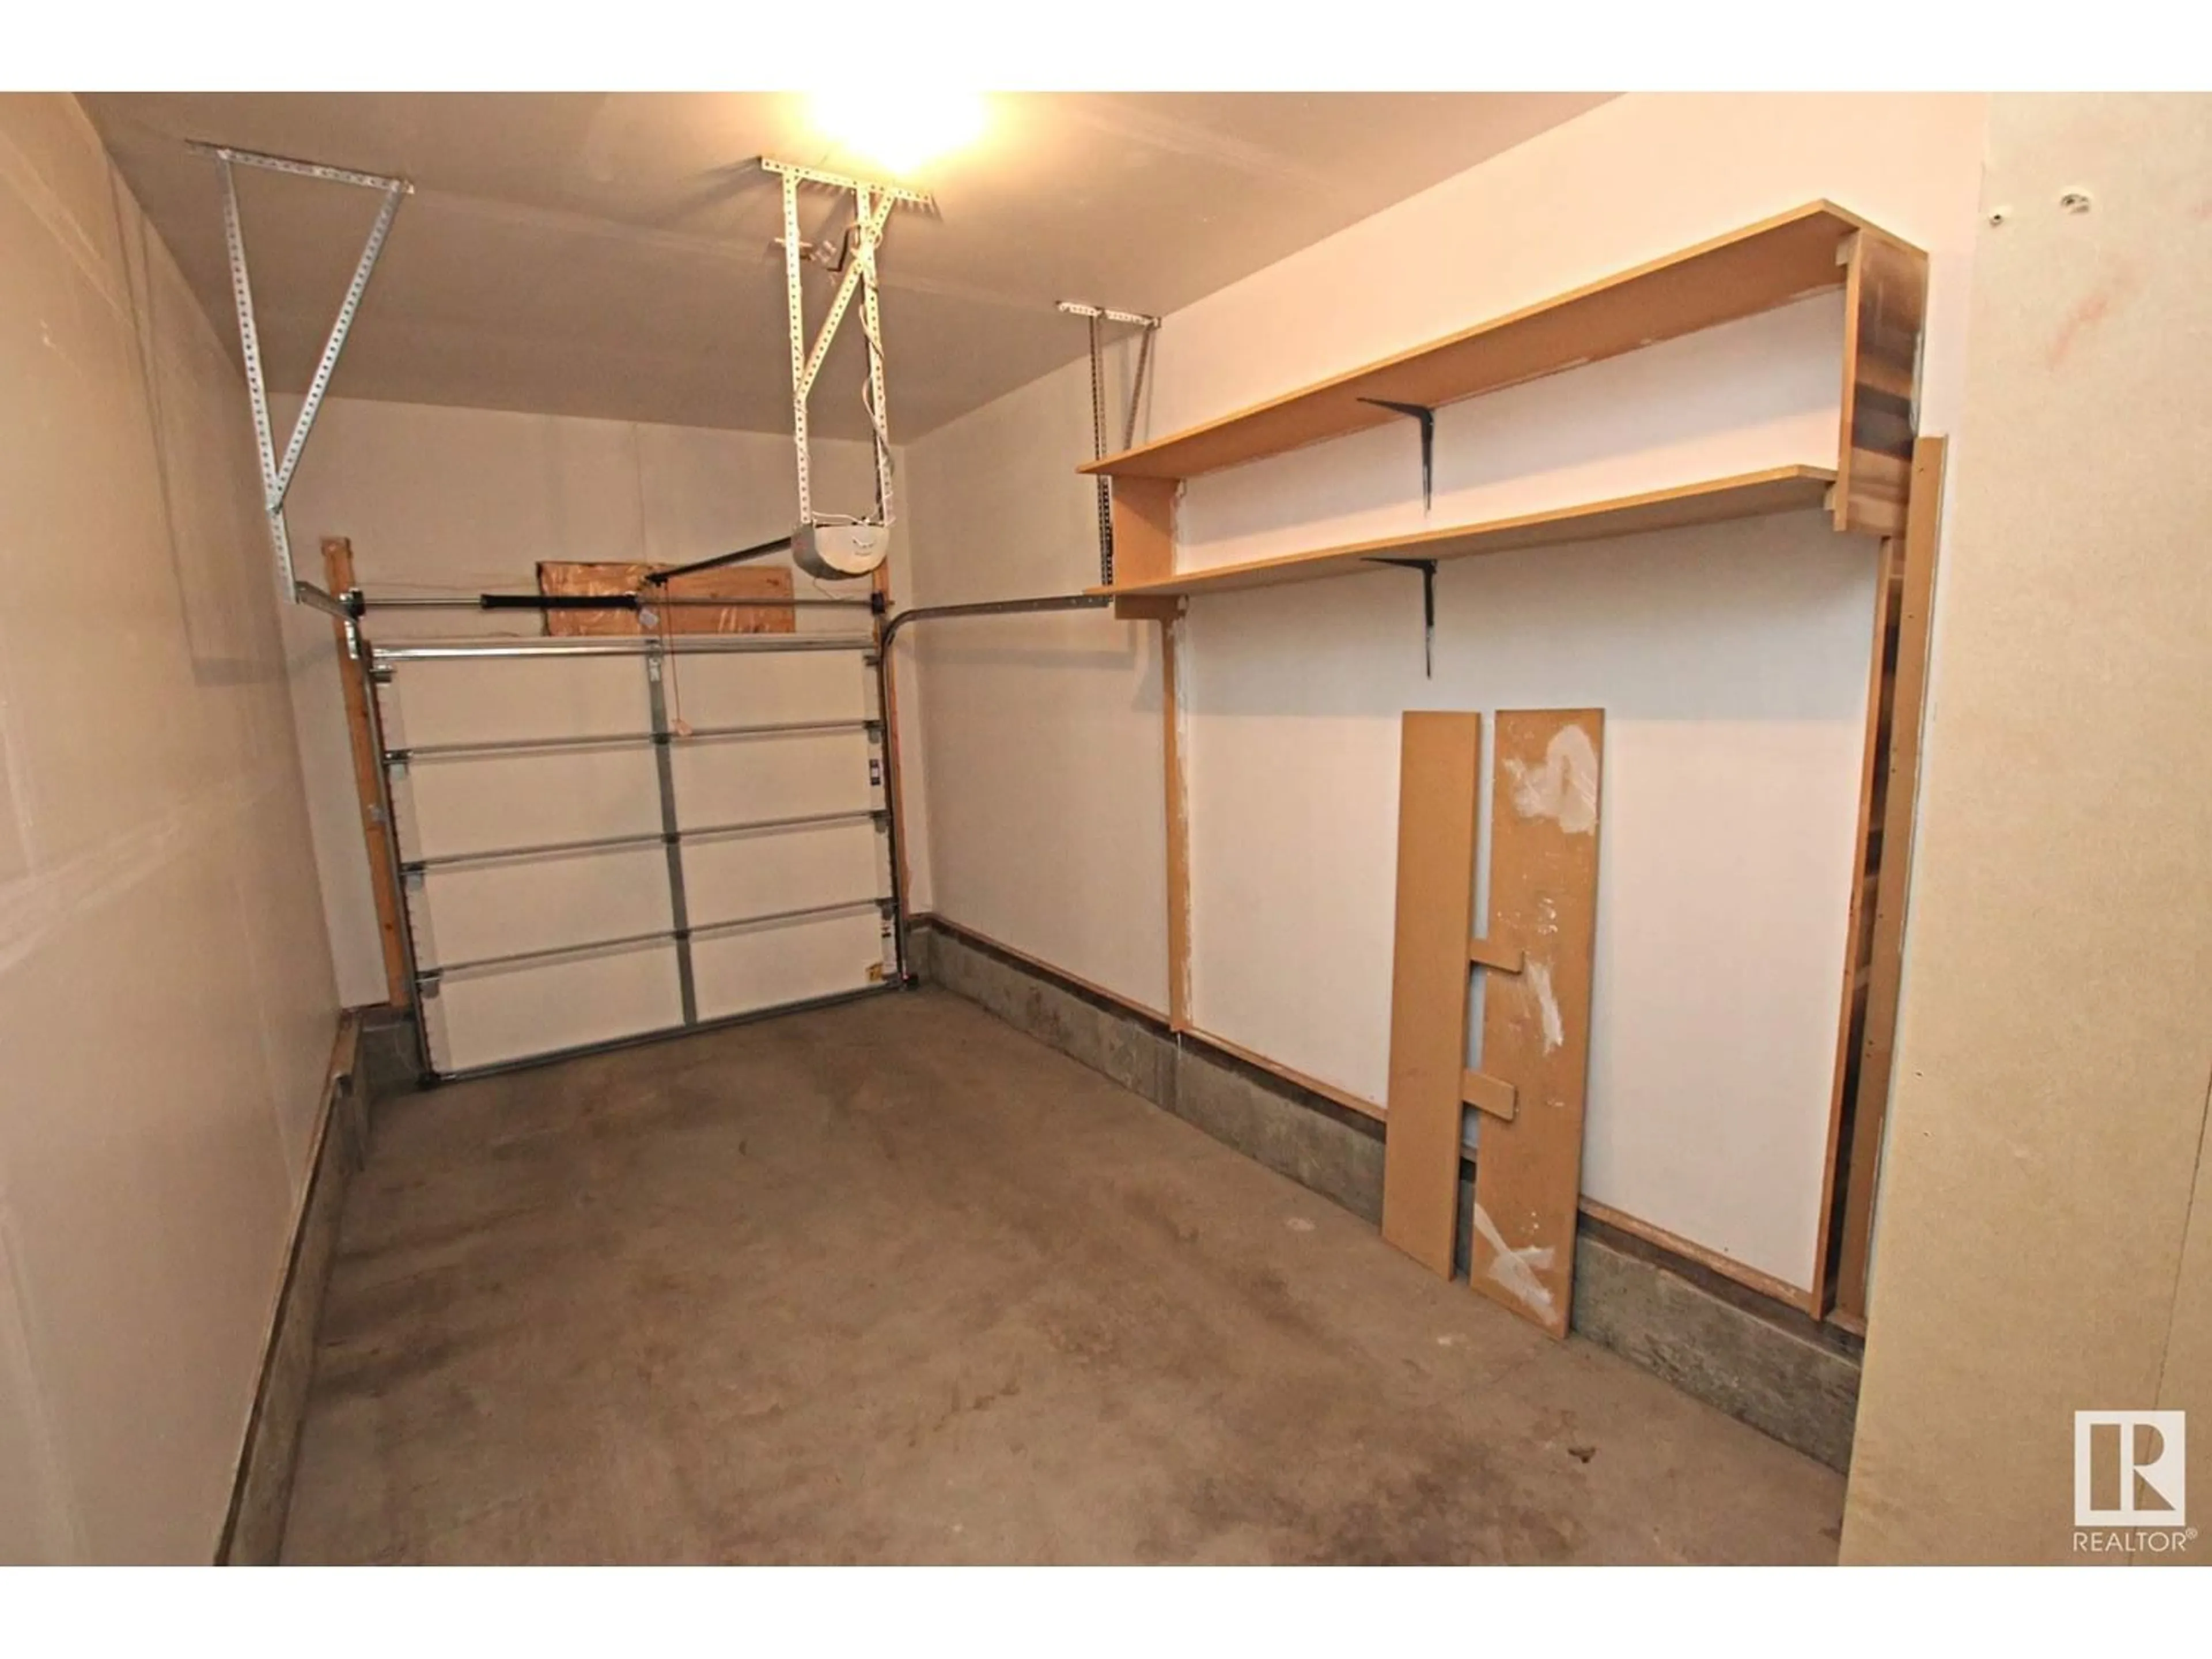 Storage room or clothes room or walk-in closet for #116 7293 SOUTH TERWILLEGAR DR NW, Edmonton Alberta T6R0N5